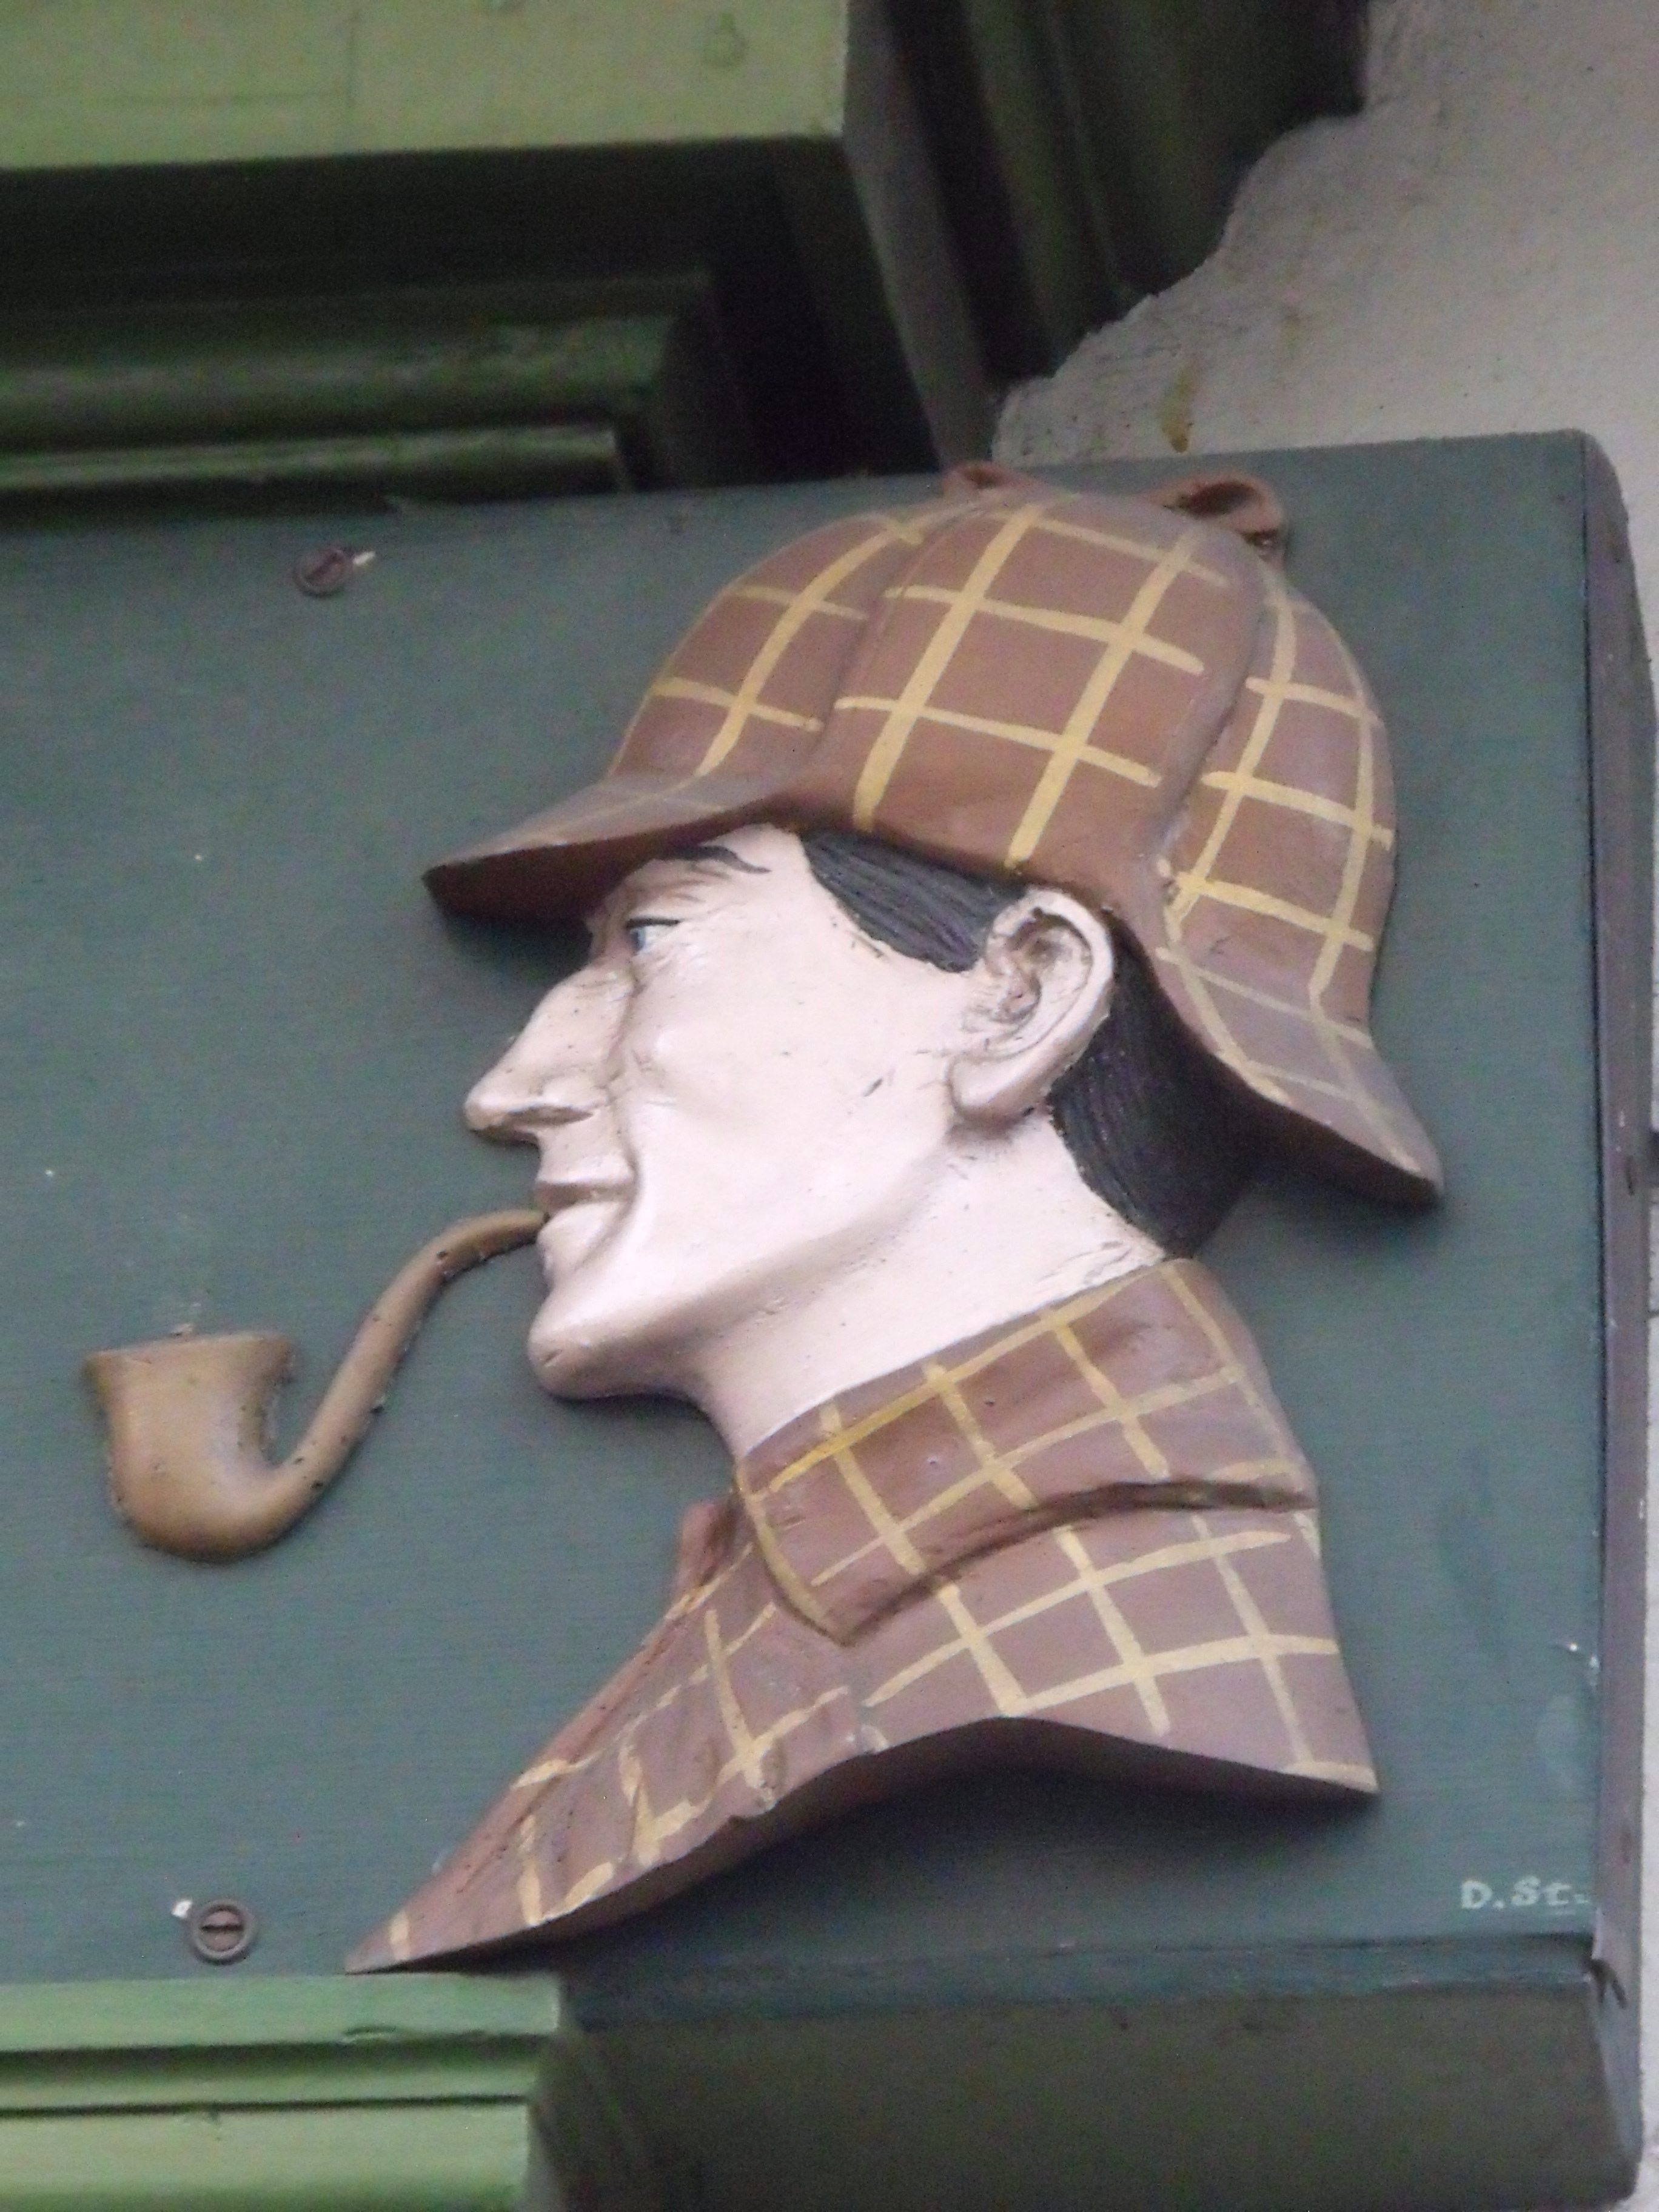 The Sherlock Holmes Museum at 221b Baker Street; image by Elliot Brown, via Flickr, CC BY 2.0, no changes.